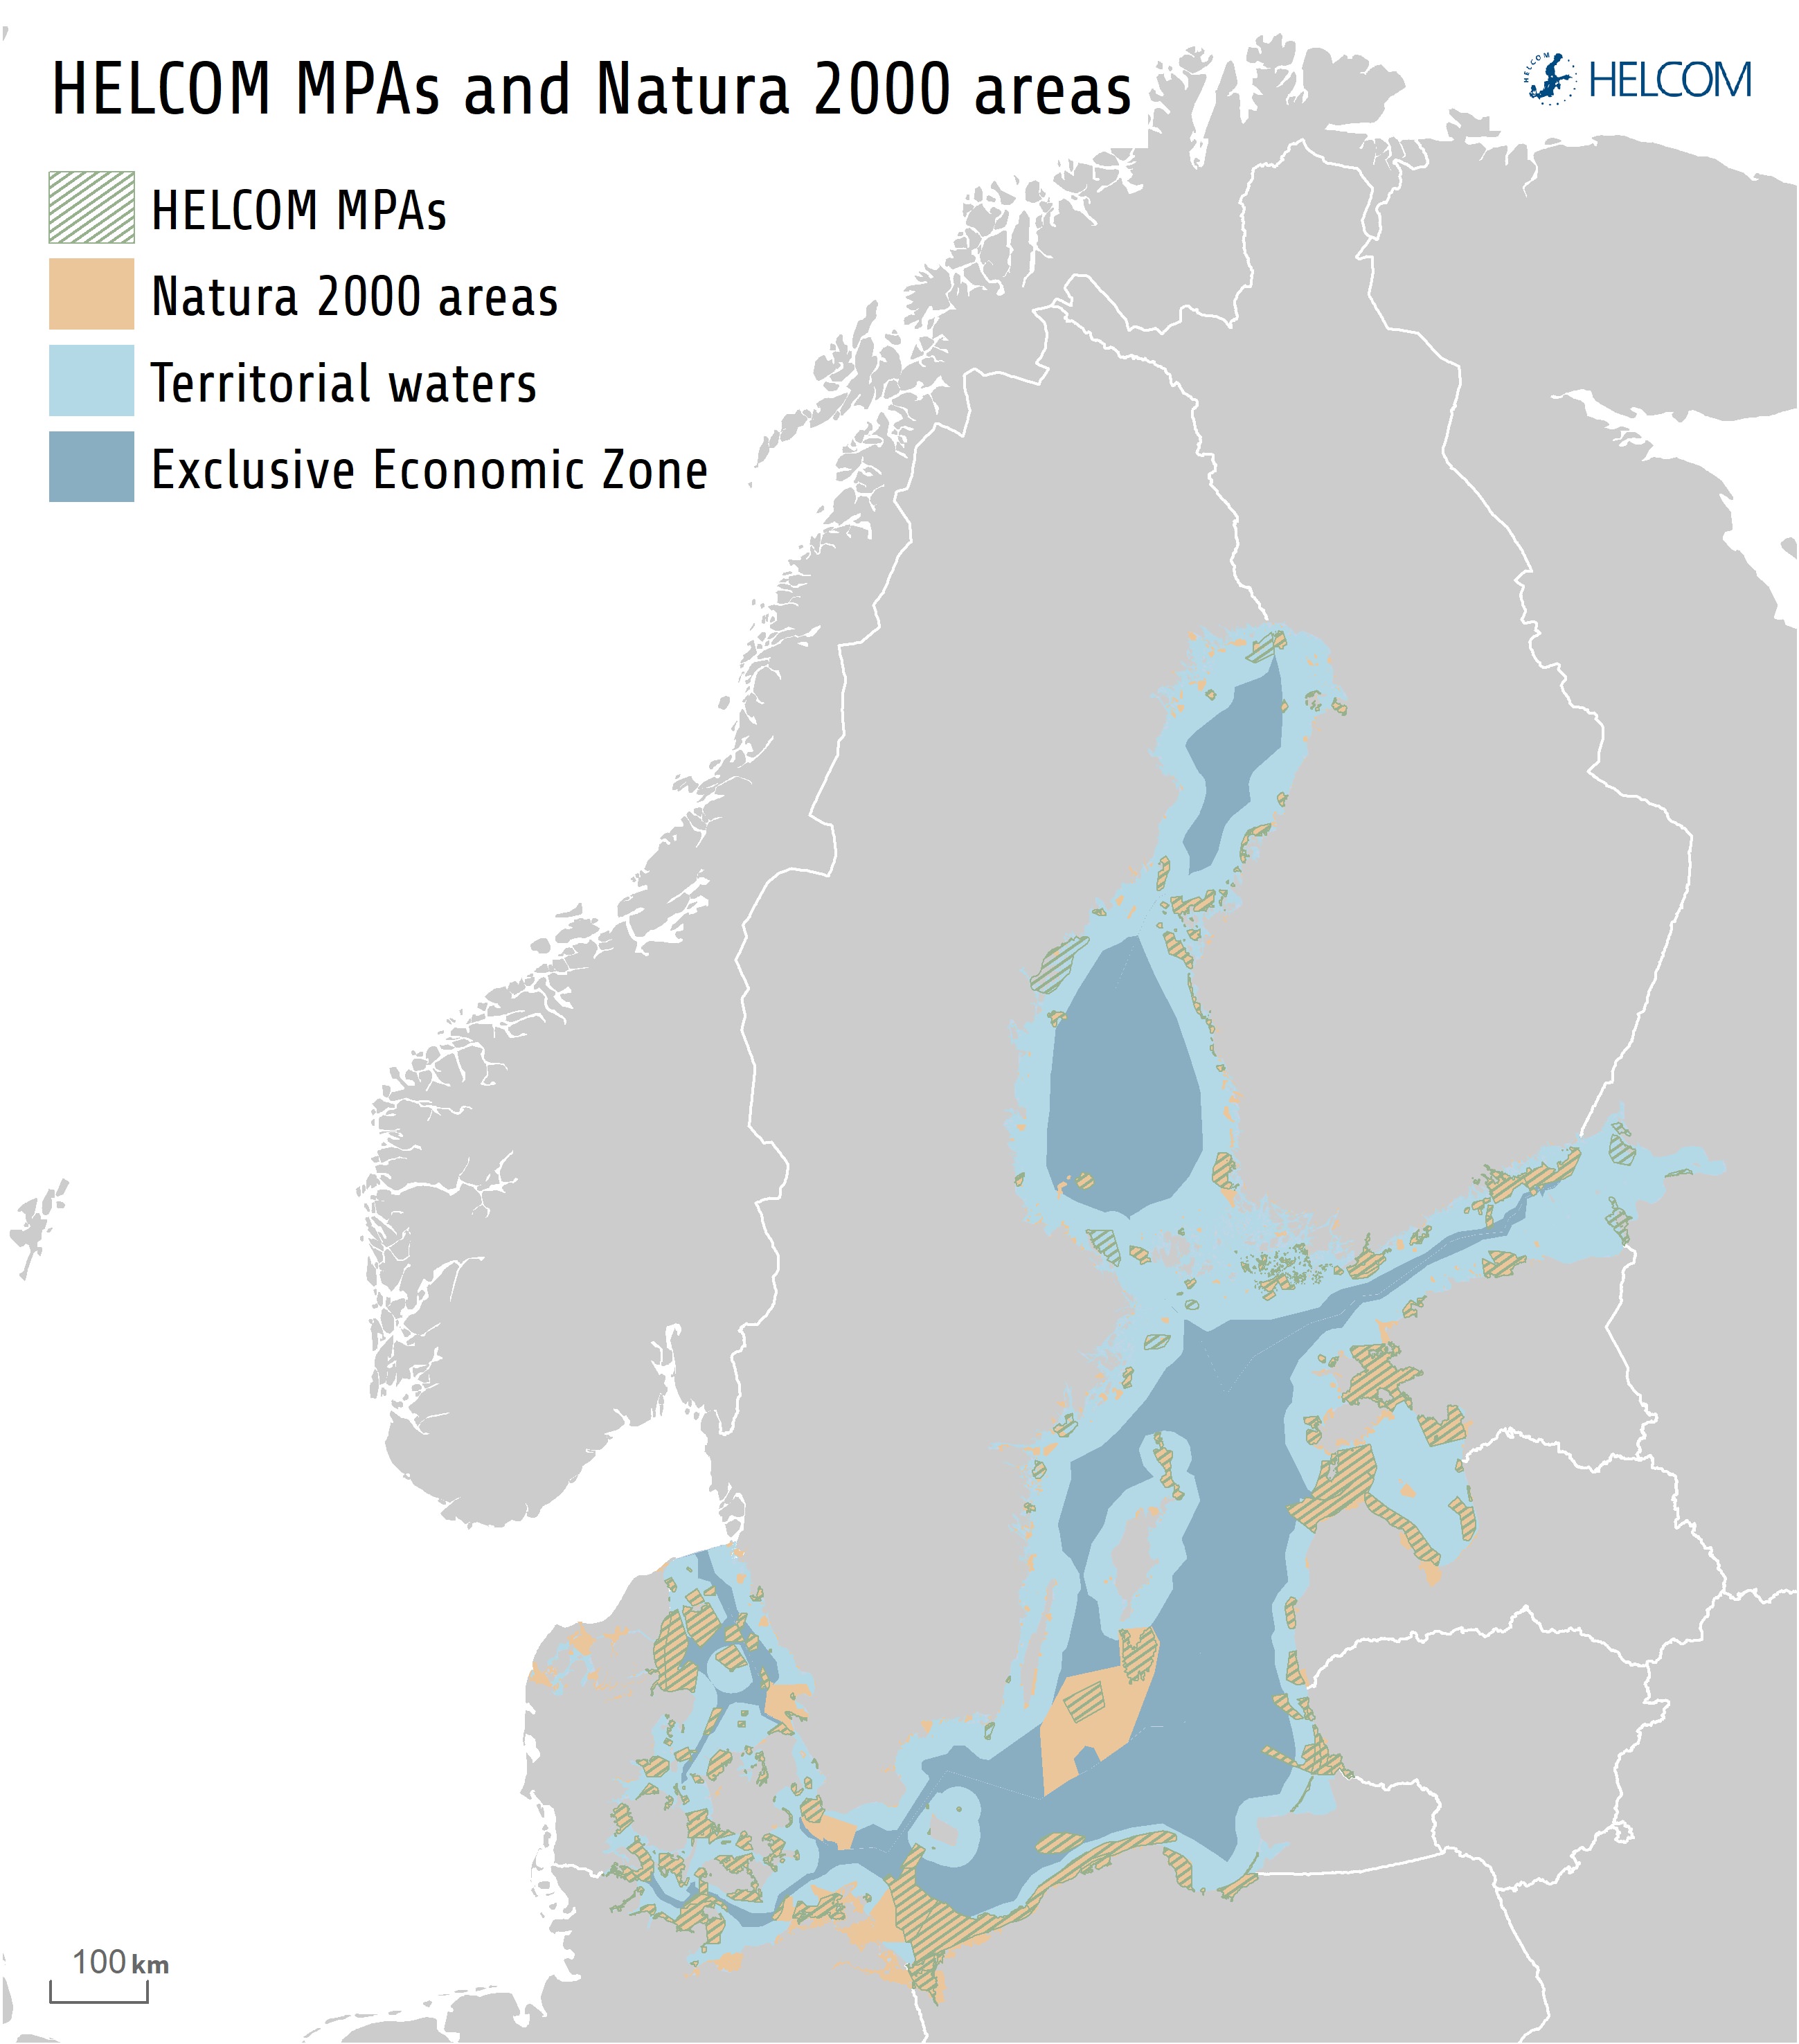 Figure 7.4. Marine Protected Areas In The Baltic Sea. The Baltic Sea Reached The Target Of Conserving At Least 10 % Of Coastal And Marine Areas, Set By The United Nations Convention On Biological Diversity. Today The Area Protected By These Marine Protected Areas (MPAs) Has Reached 12 %.